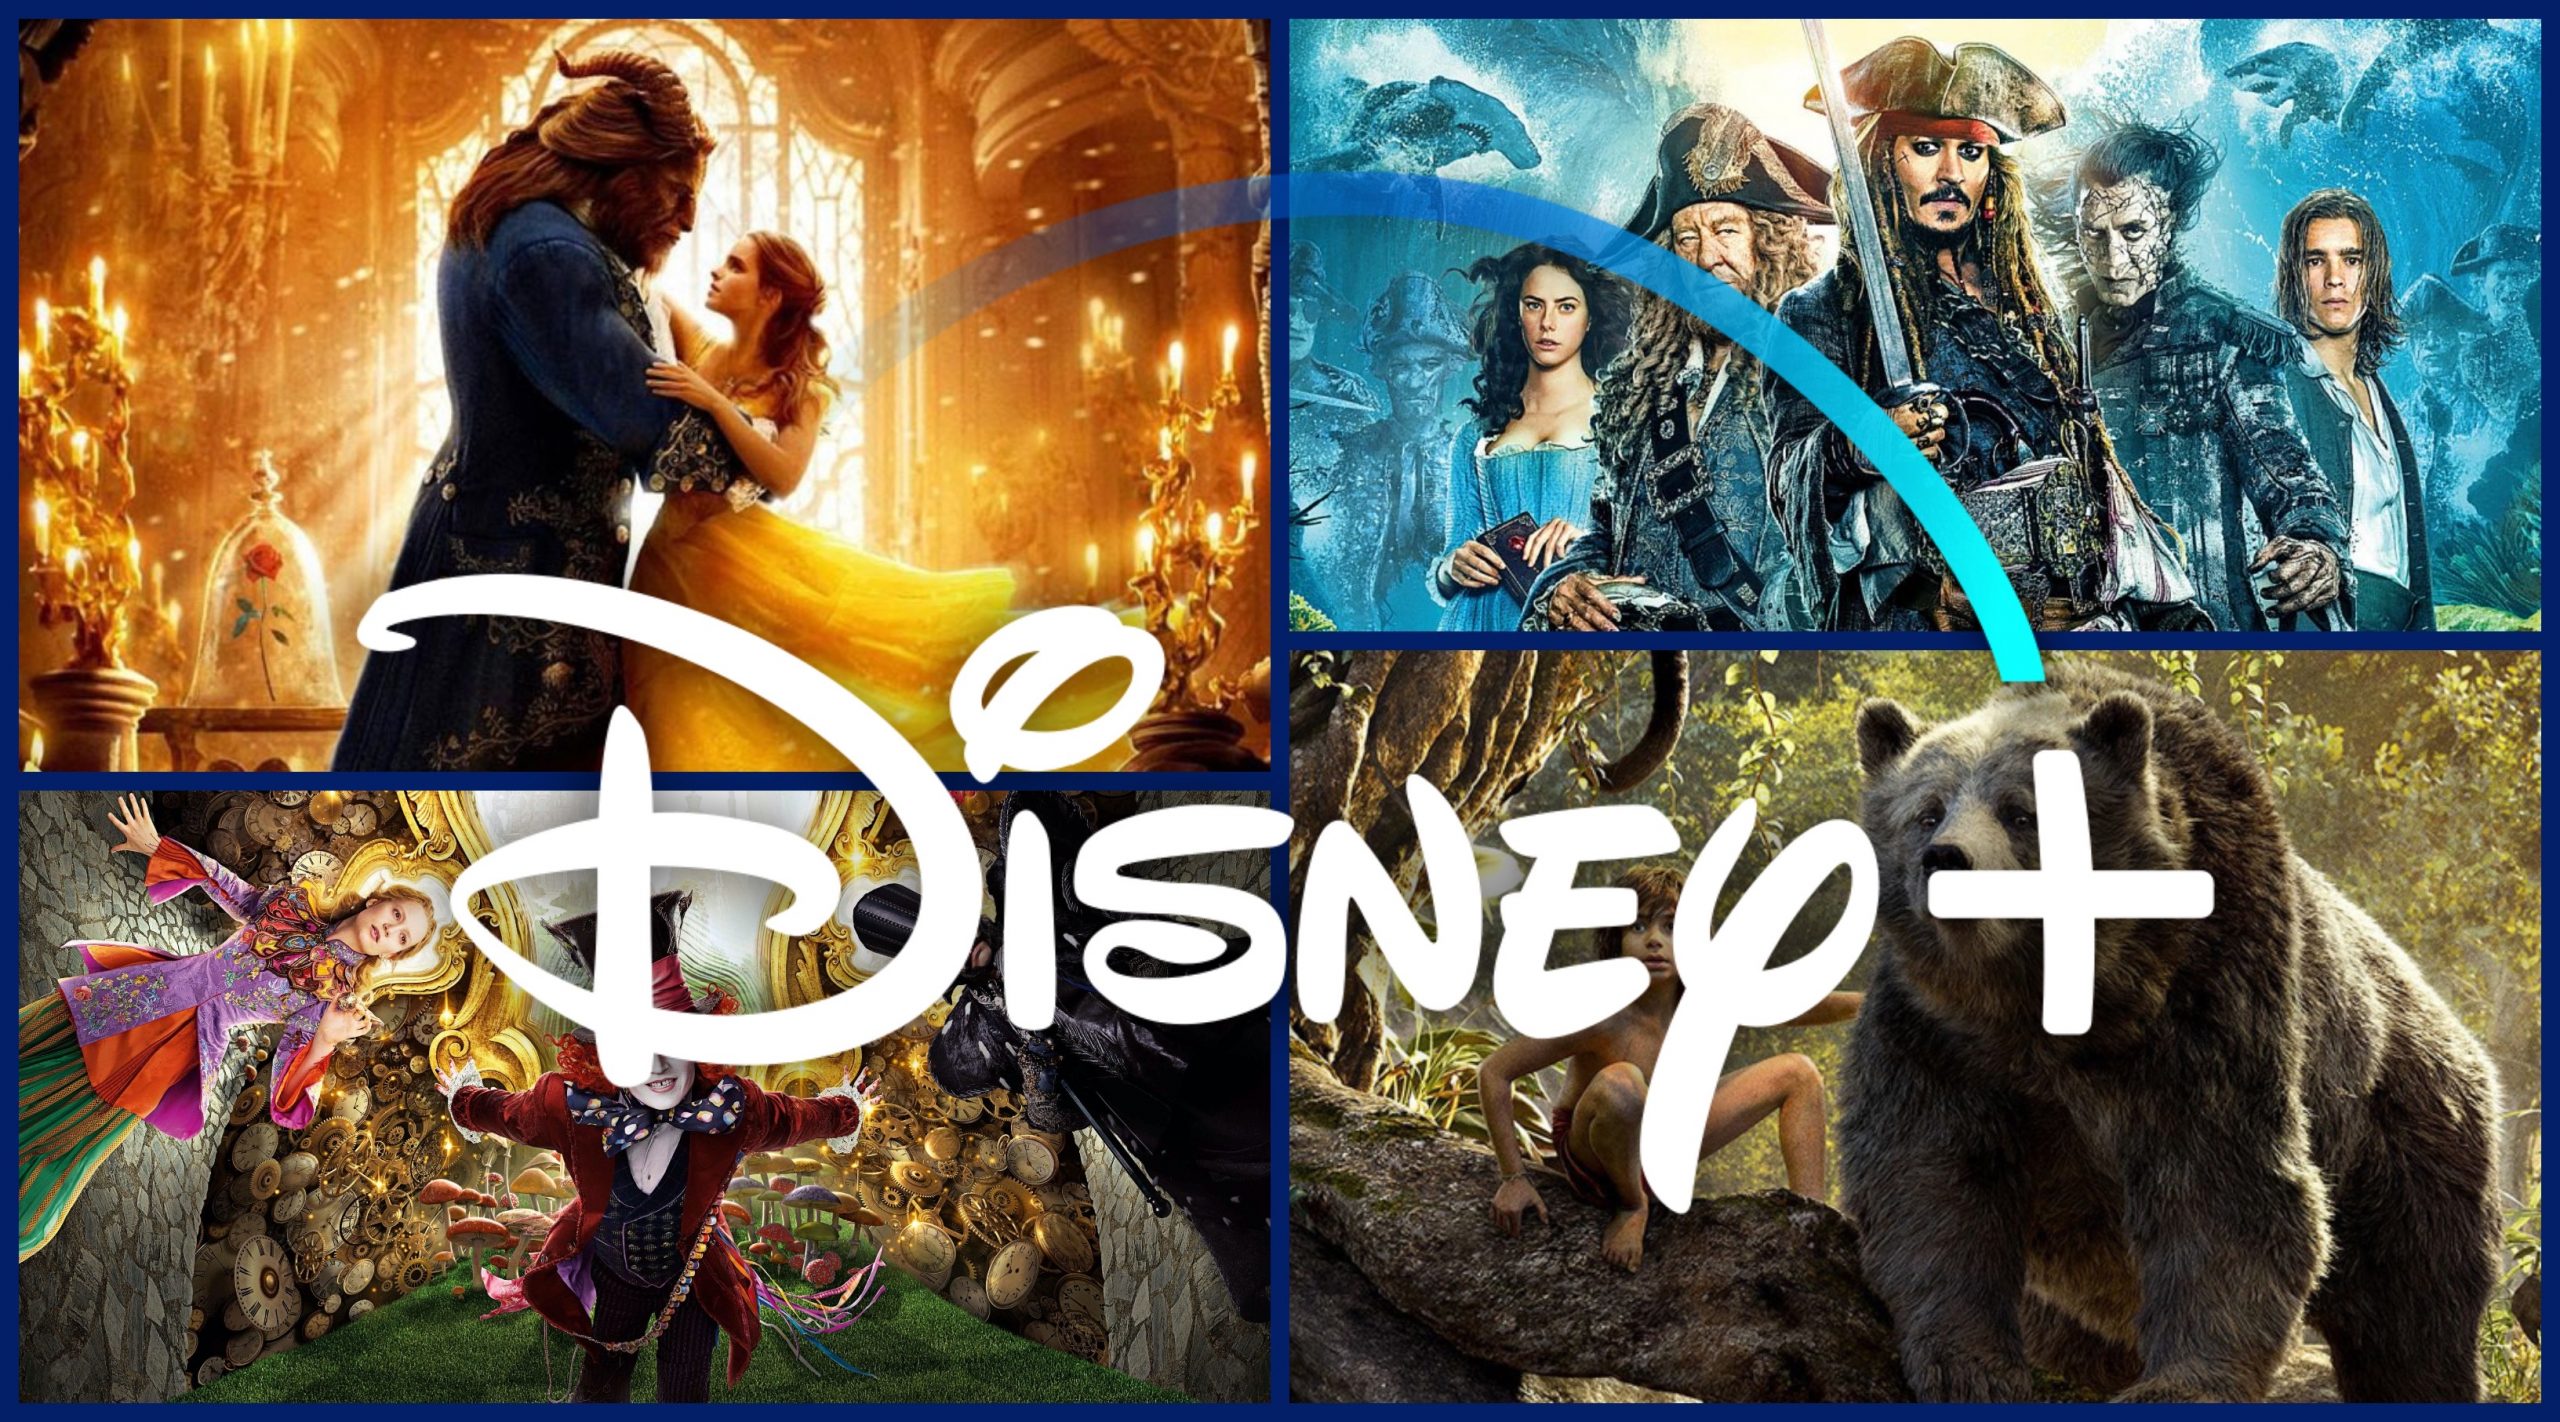 These Disney Live-Action Films Will Debut on Disney+ Earlier than Expected